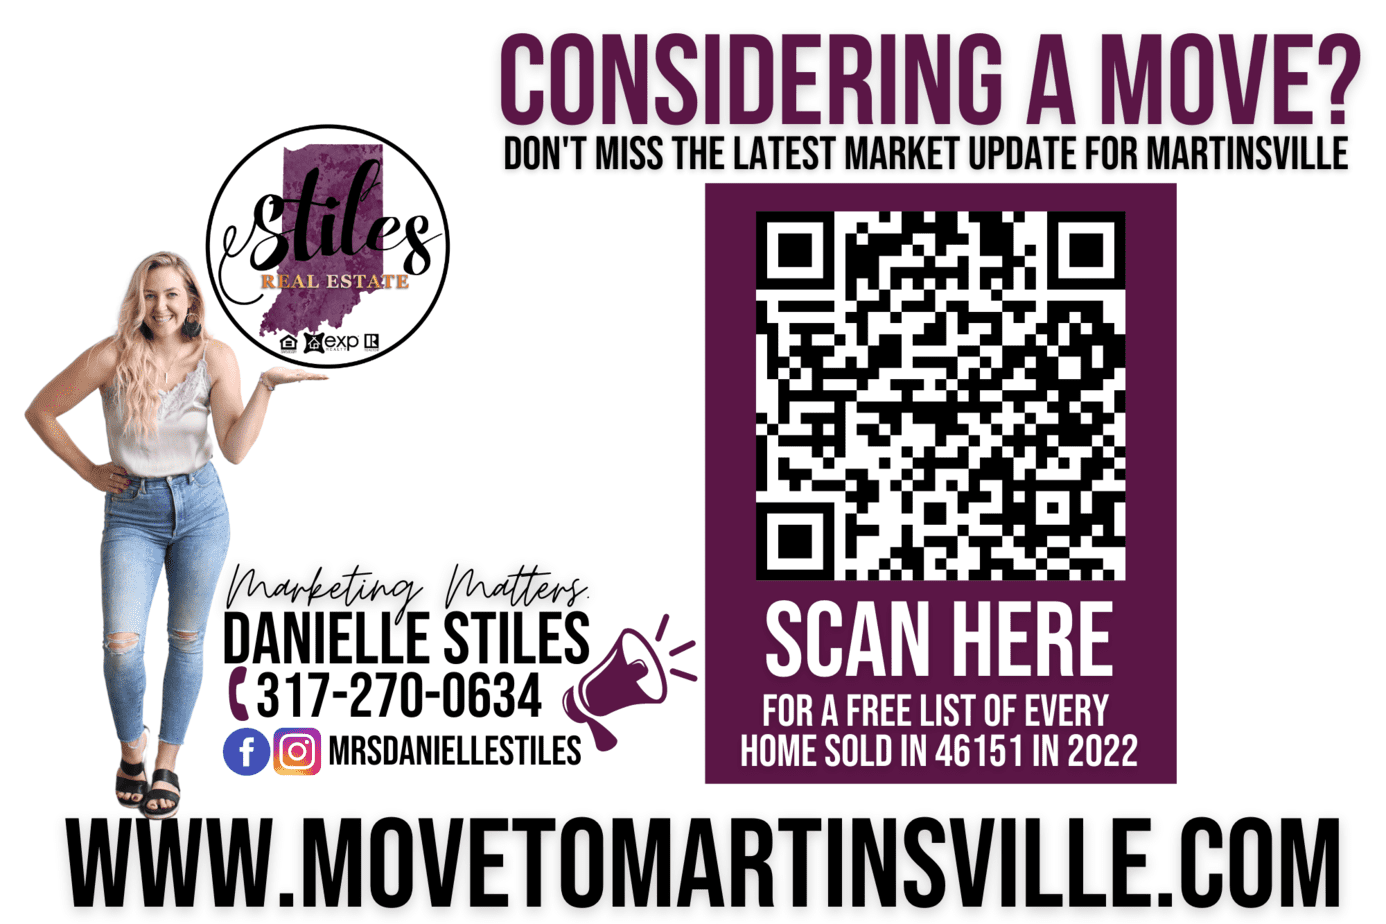 Move to martinsville